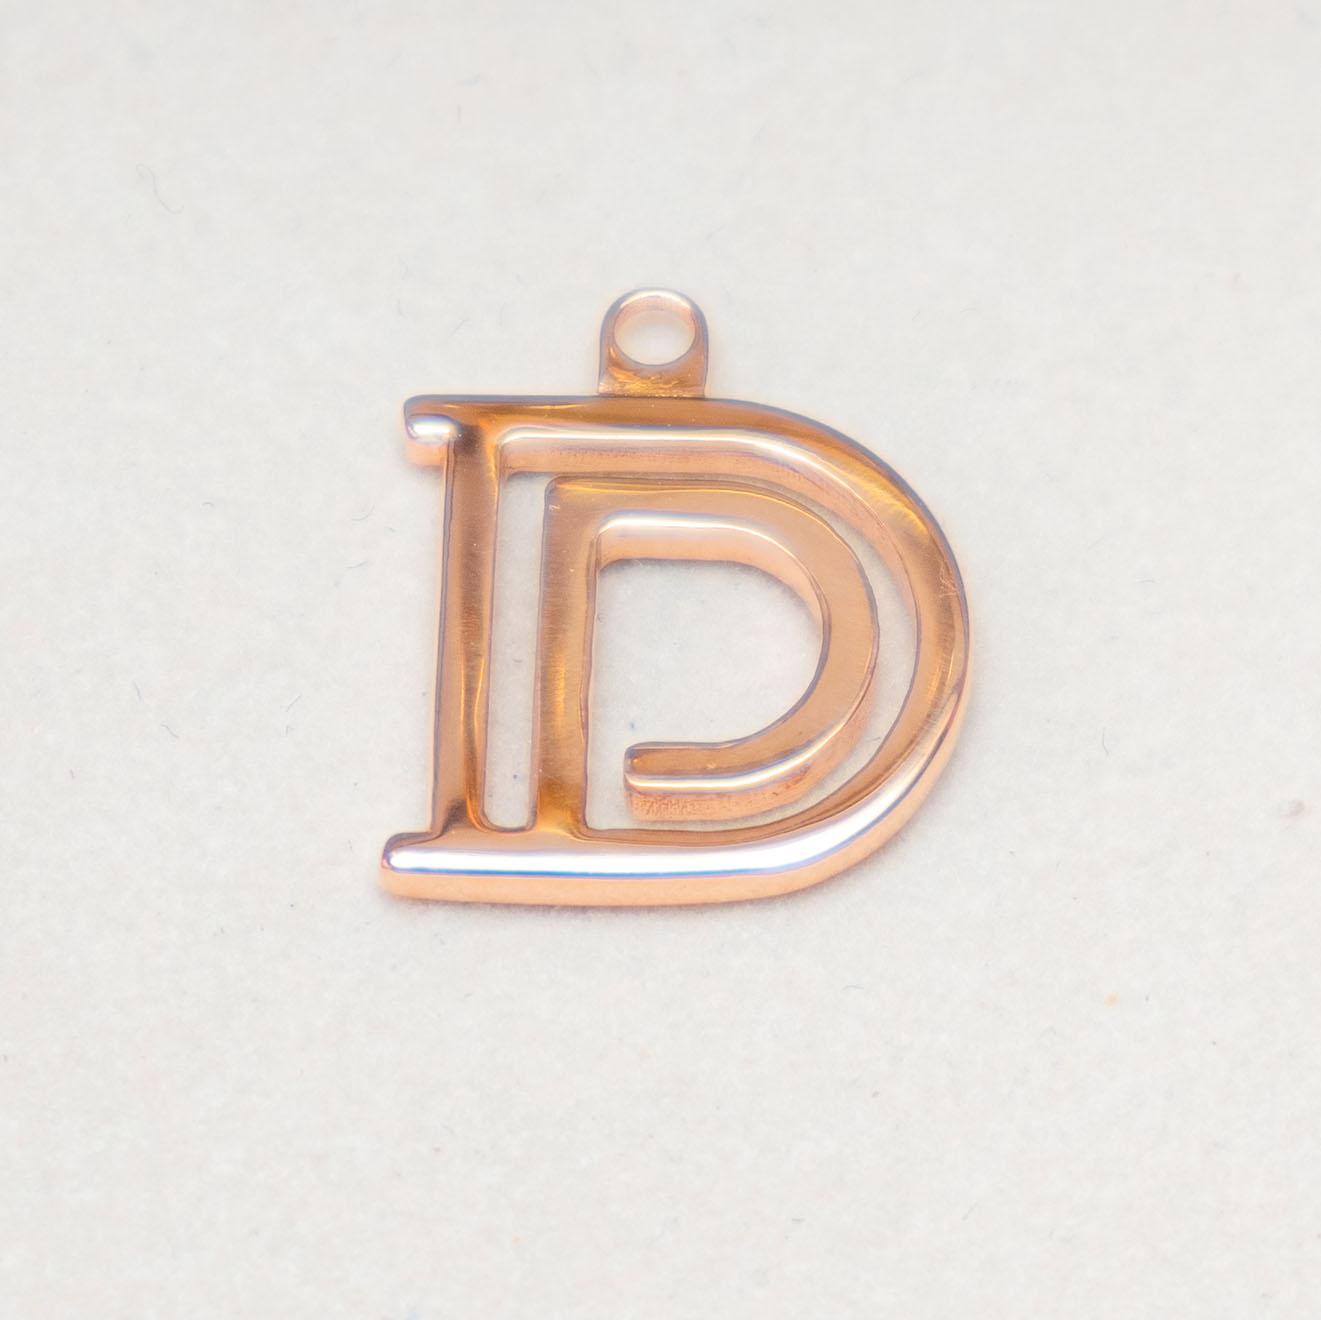 Dpiphany collection - The Classic DP Pendant (Rose gold)